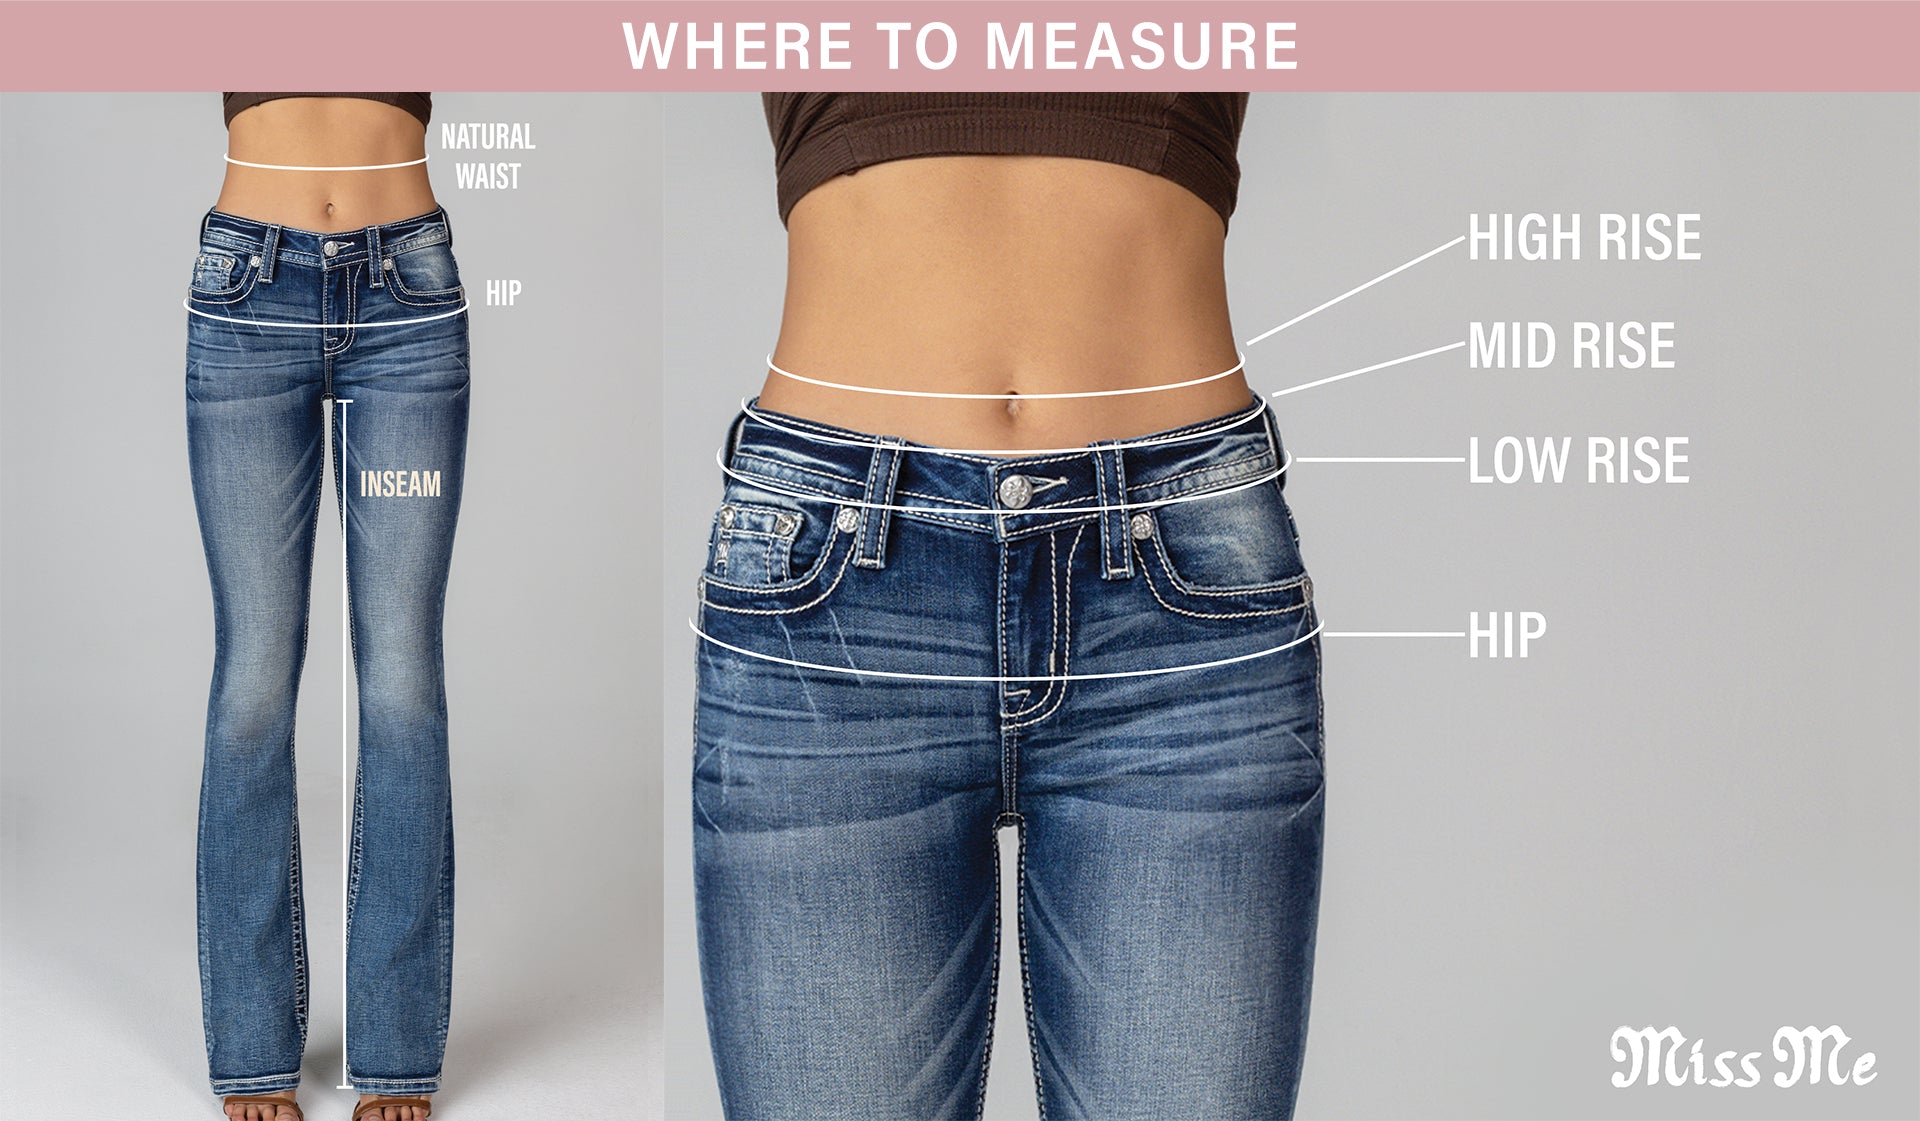 How do I measure myself for sizing?